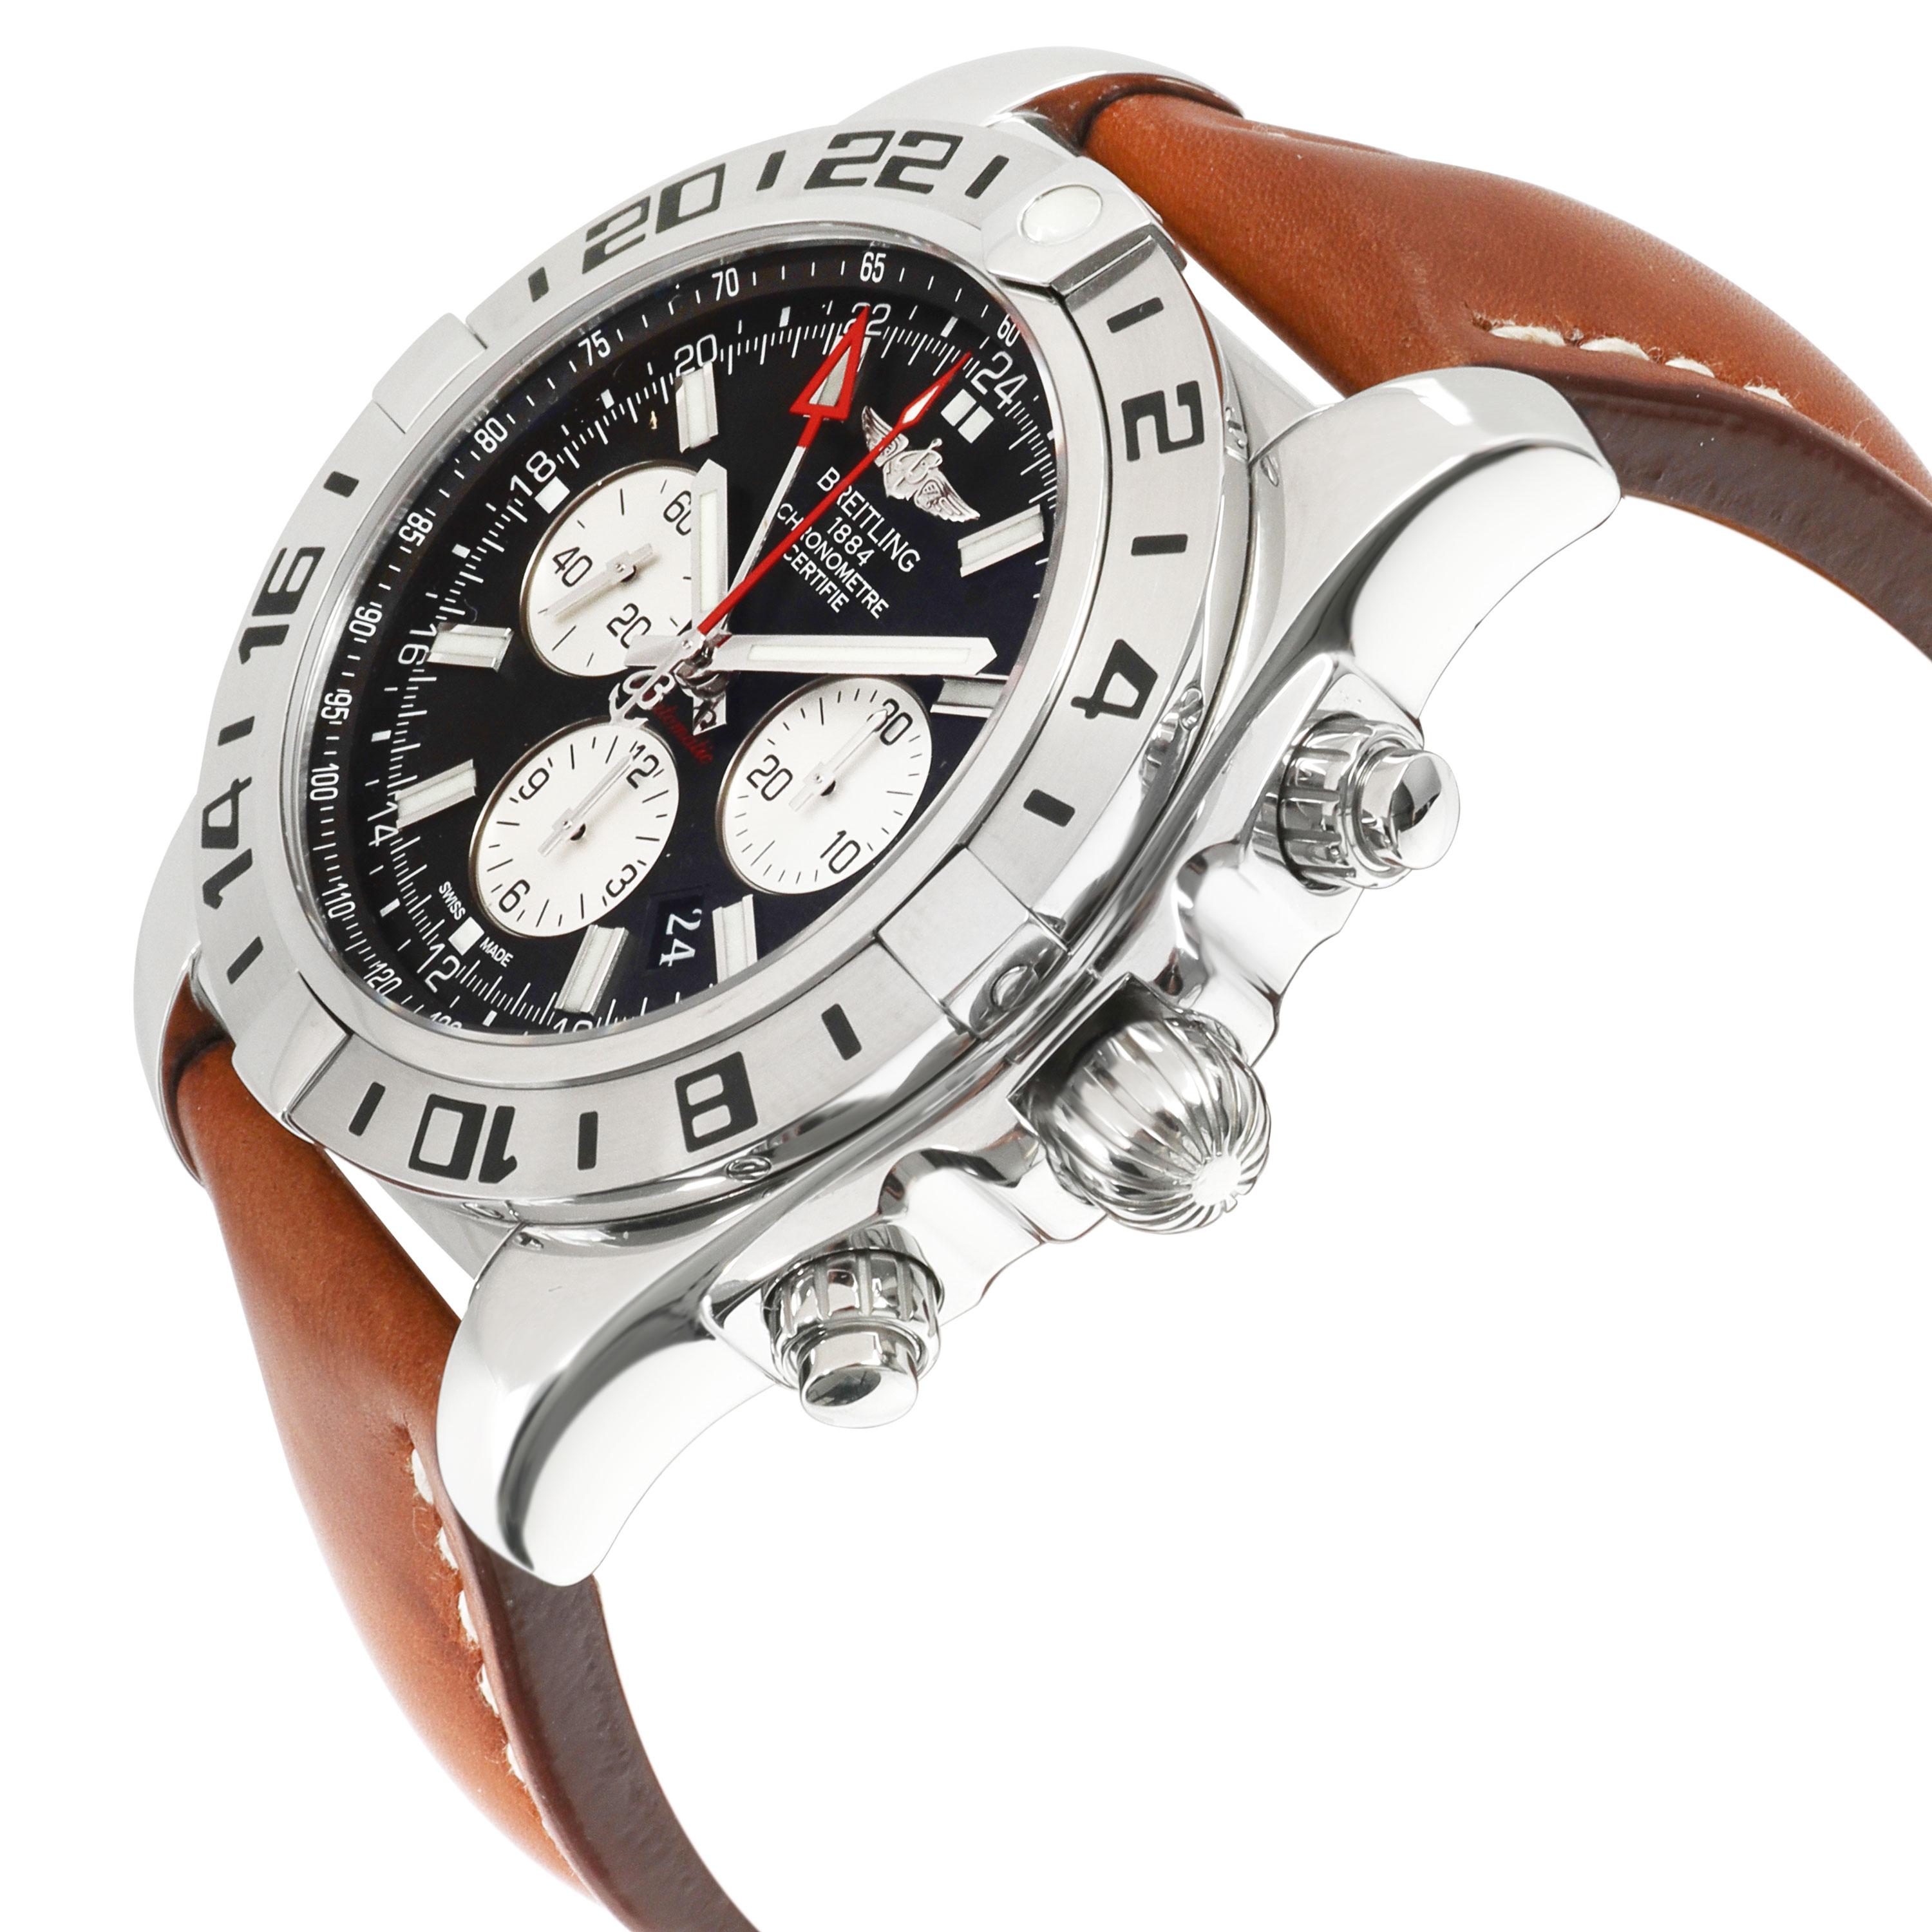 Breitling Chronomat GMT AB0413B9/BD17 Men's Watch in Stainless Steel

SKU: 108748

PRIMARY DETAILS
Brand: Breitling
Model: Chronomat GMT
Country of Origin: Switzerland
Movement Type: Mechanical: Automatic/Kinetic
Year Manufactured: 2014
Year of